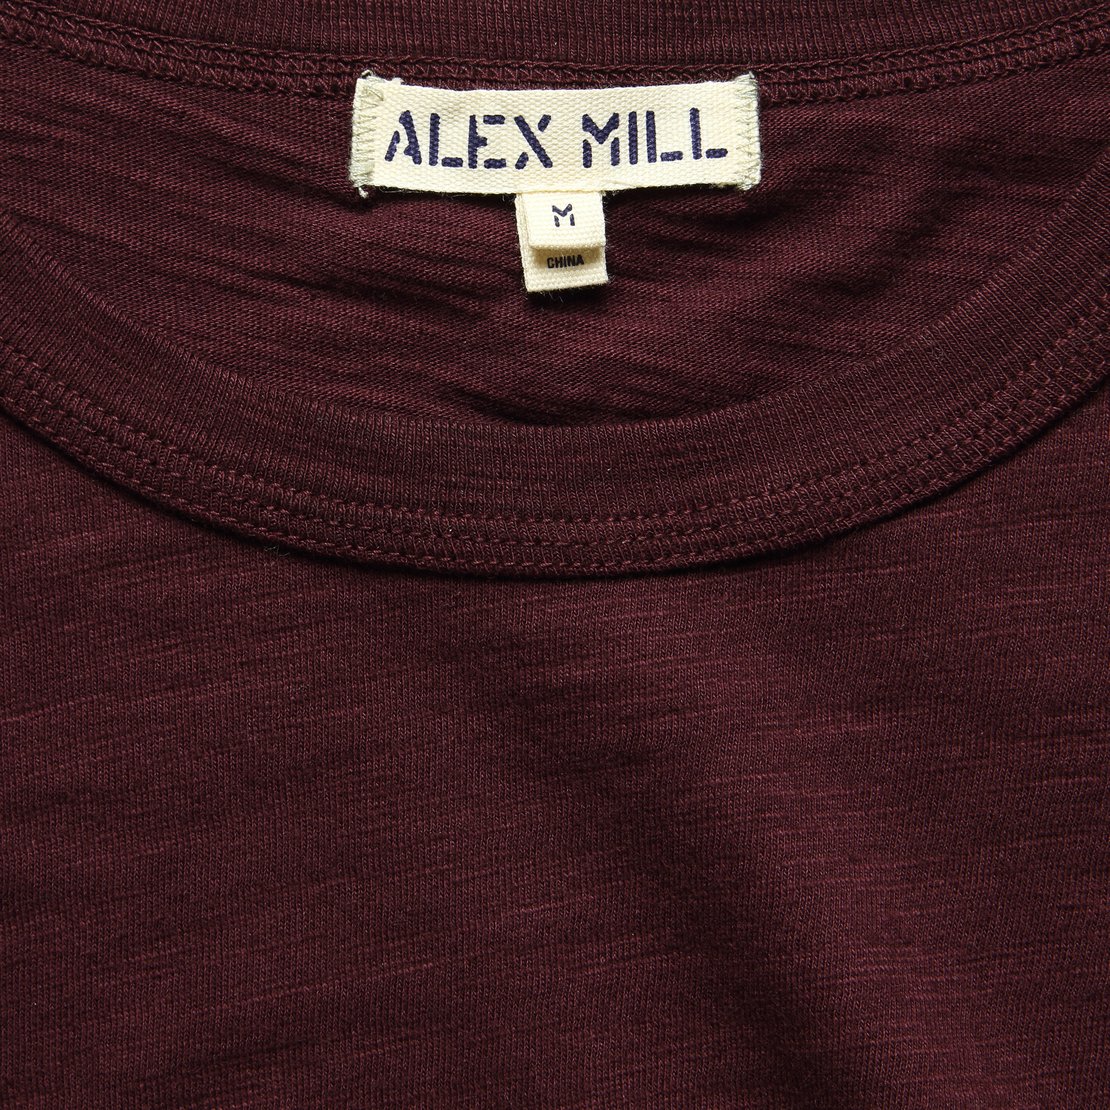 New Standard Crew Tee - Wine - Alex Mill - STAG Provisions - Tops - S/S Tee